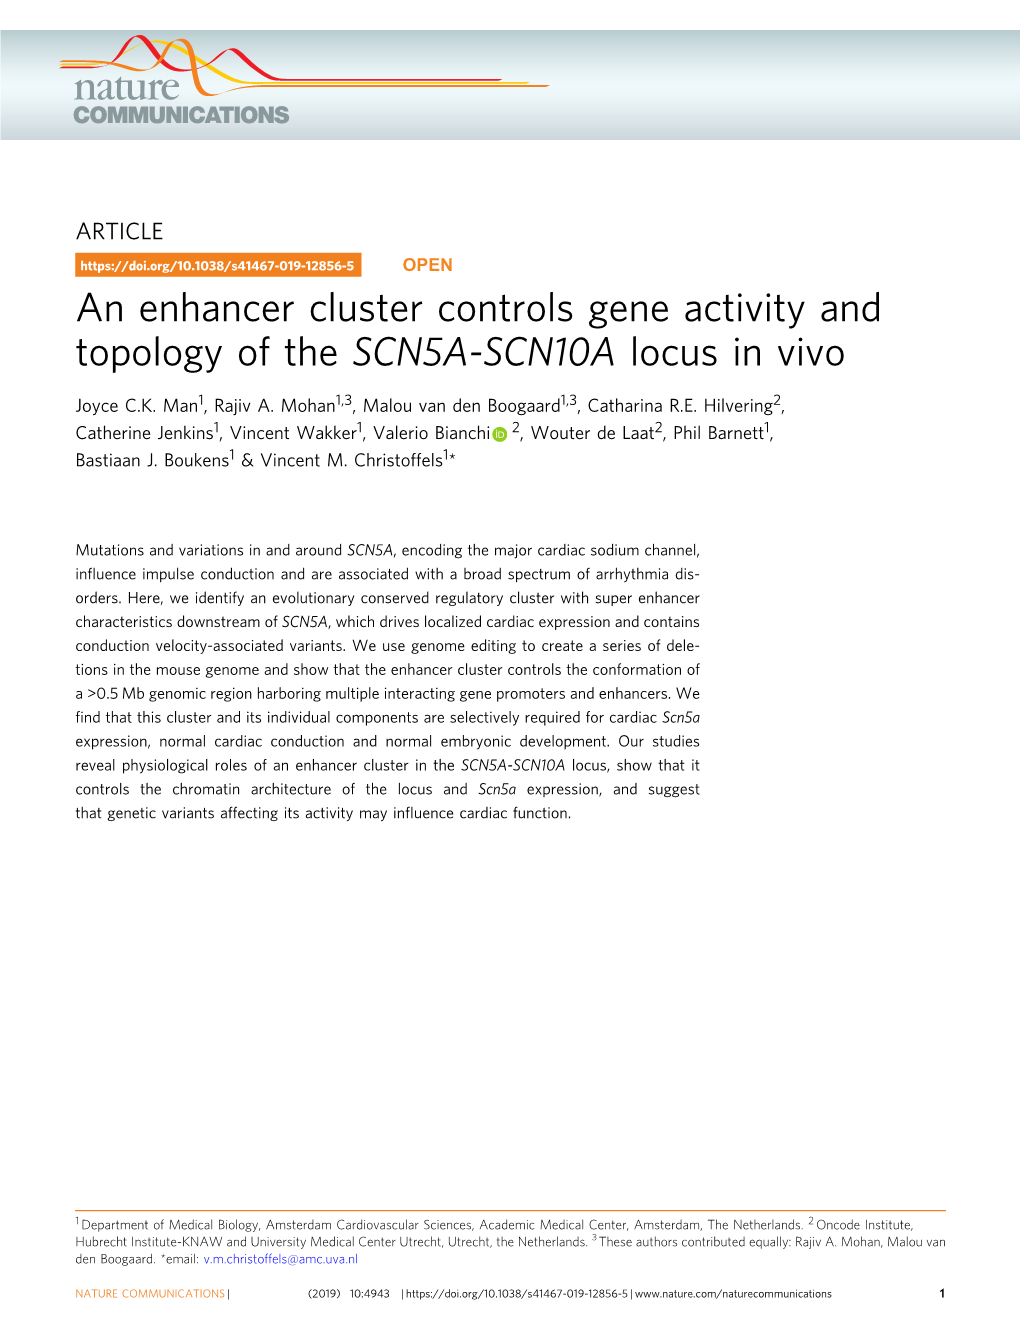 An Enhancer Cluster Controls Gene Activity and Topology of the SCN5A-SCN10A Locus in Vivo